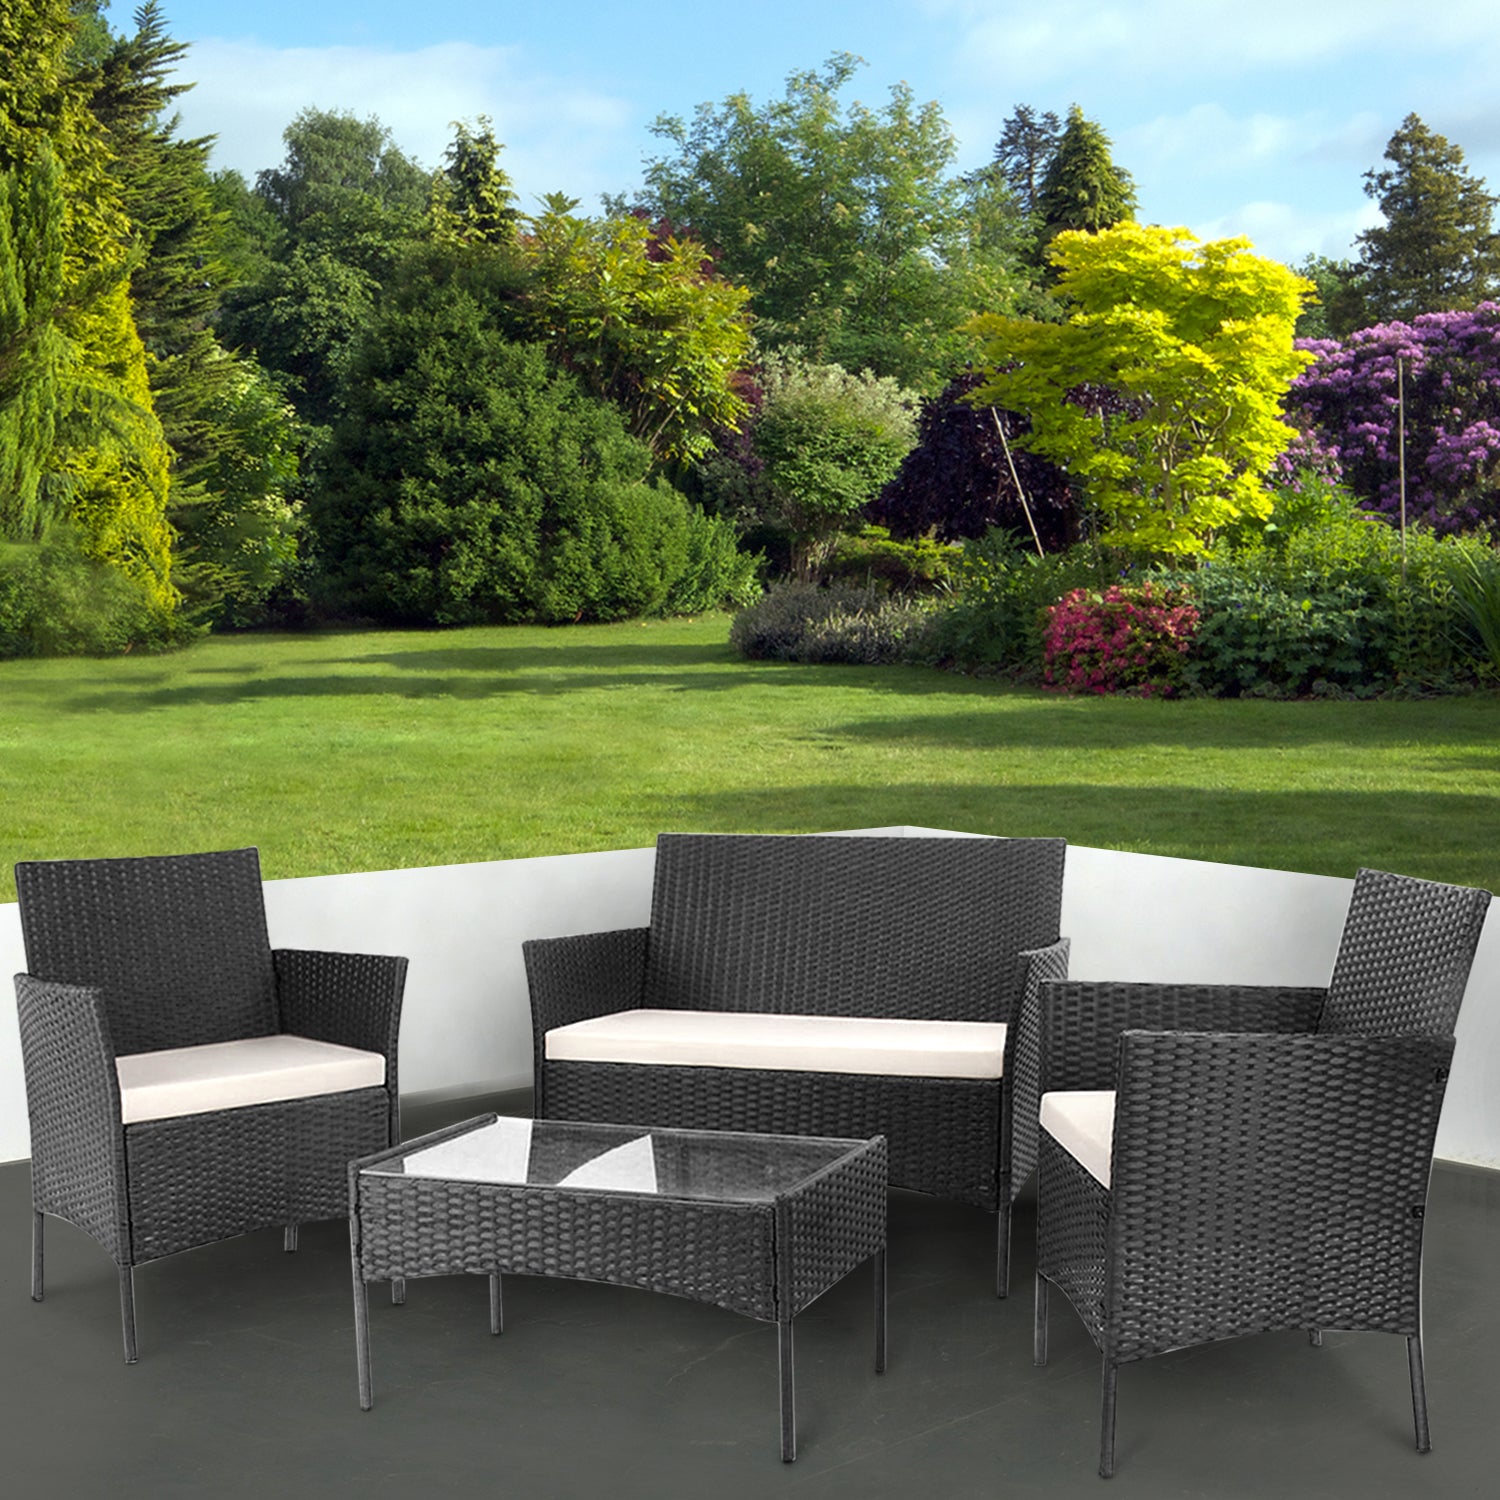 4-Piece Rattan Garden Furniture Set - Outdoor Lounger Sofa, Stackable Chairs & Bistro Table